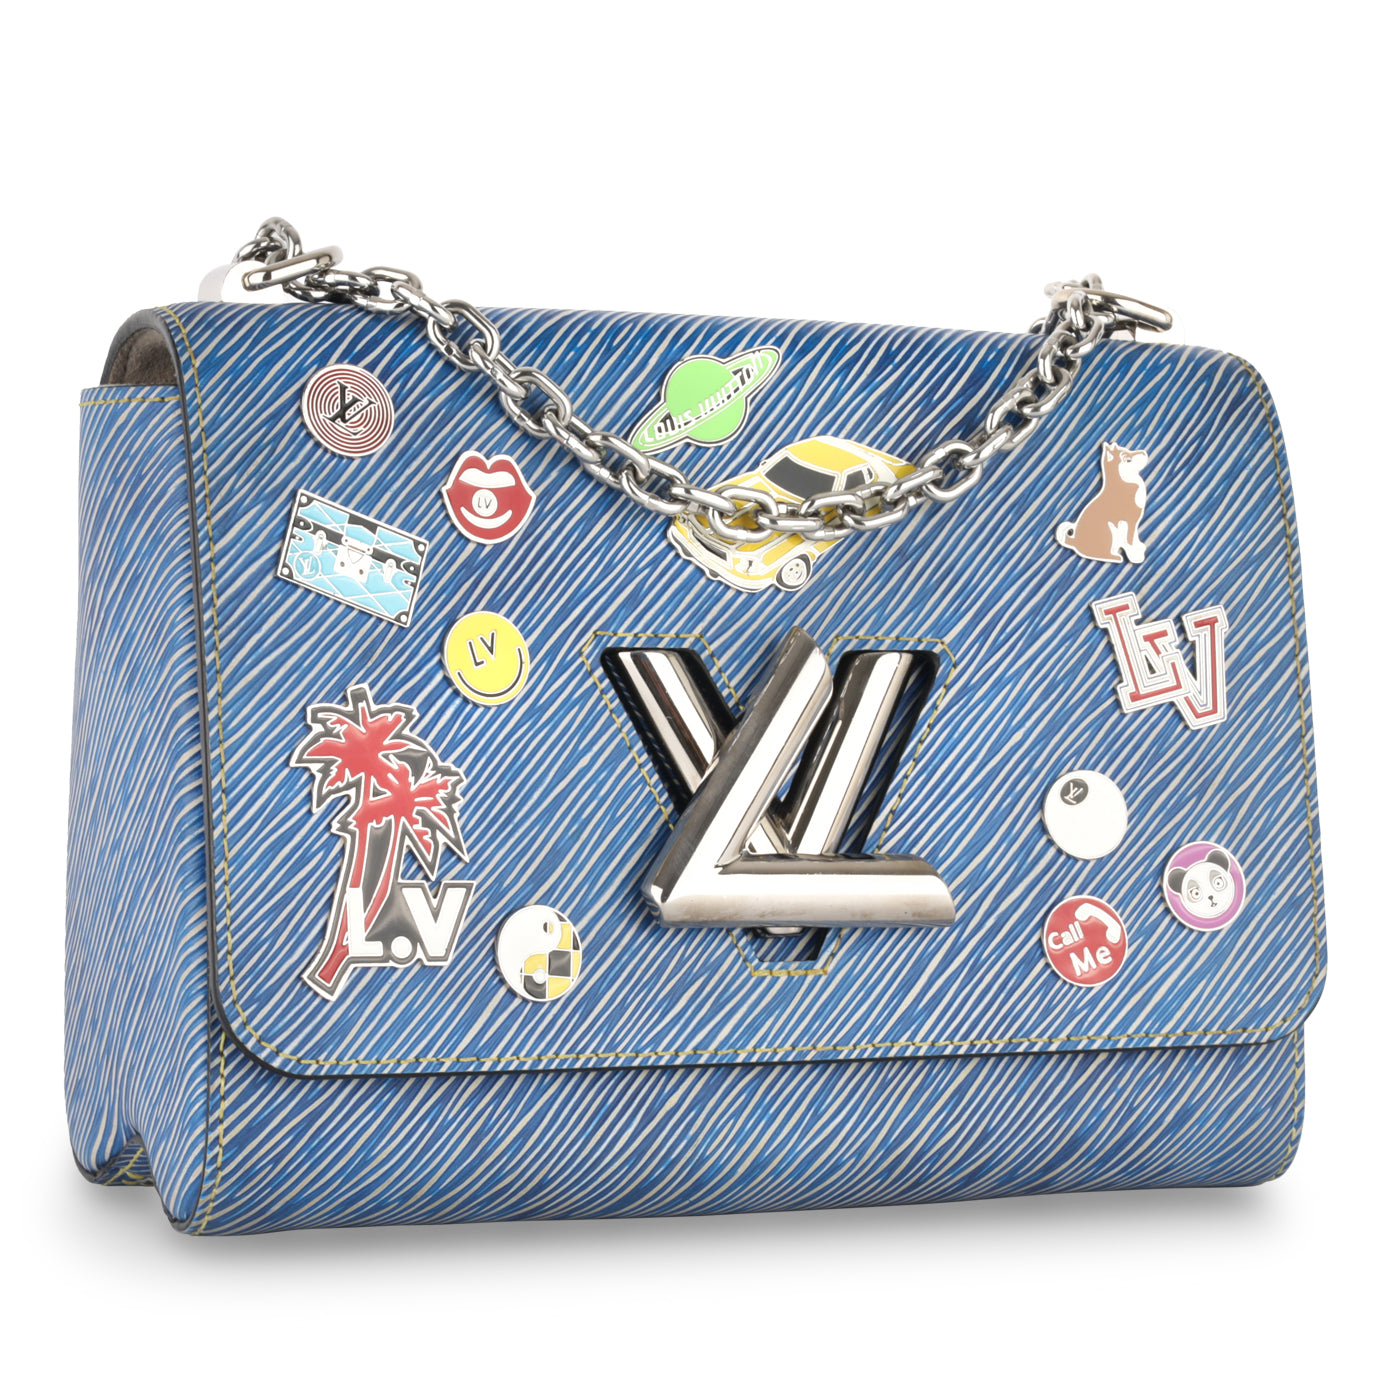 louis vuitton blue and pink bag